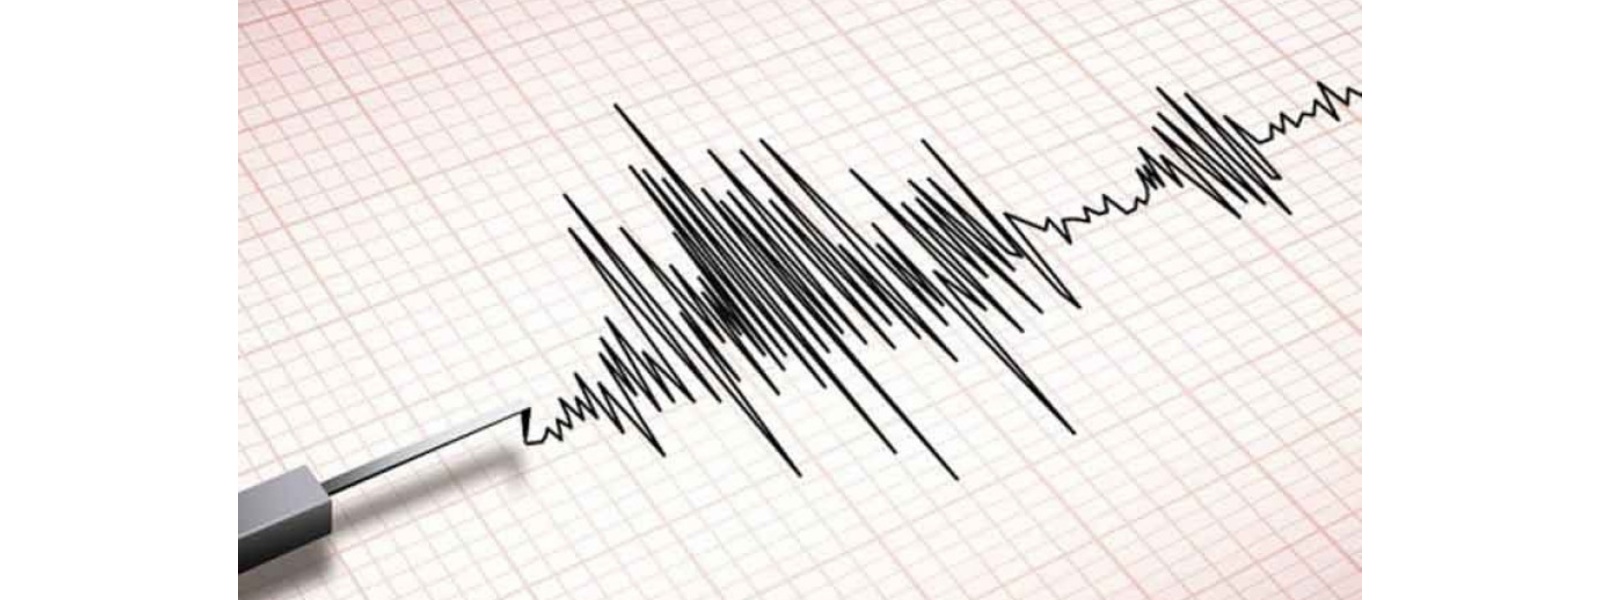 Magnitude 5.0 tremor in Indian Ocean, South of Sri Lanka; No impact to the island – GSMB